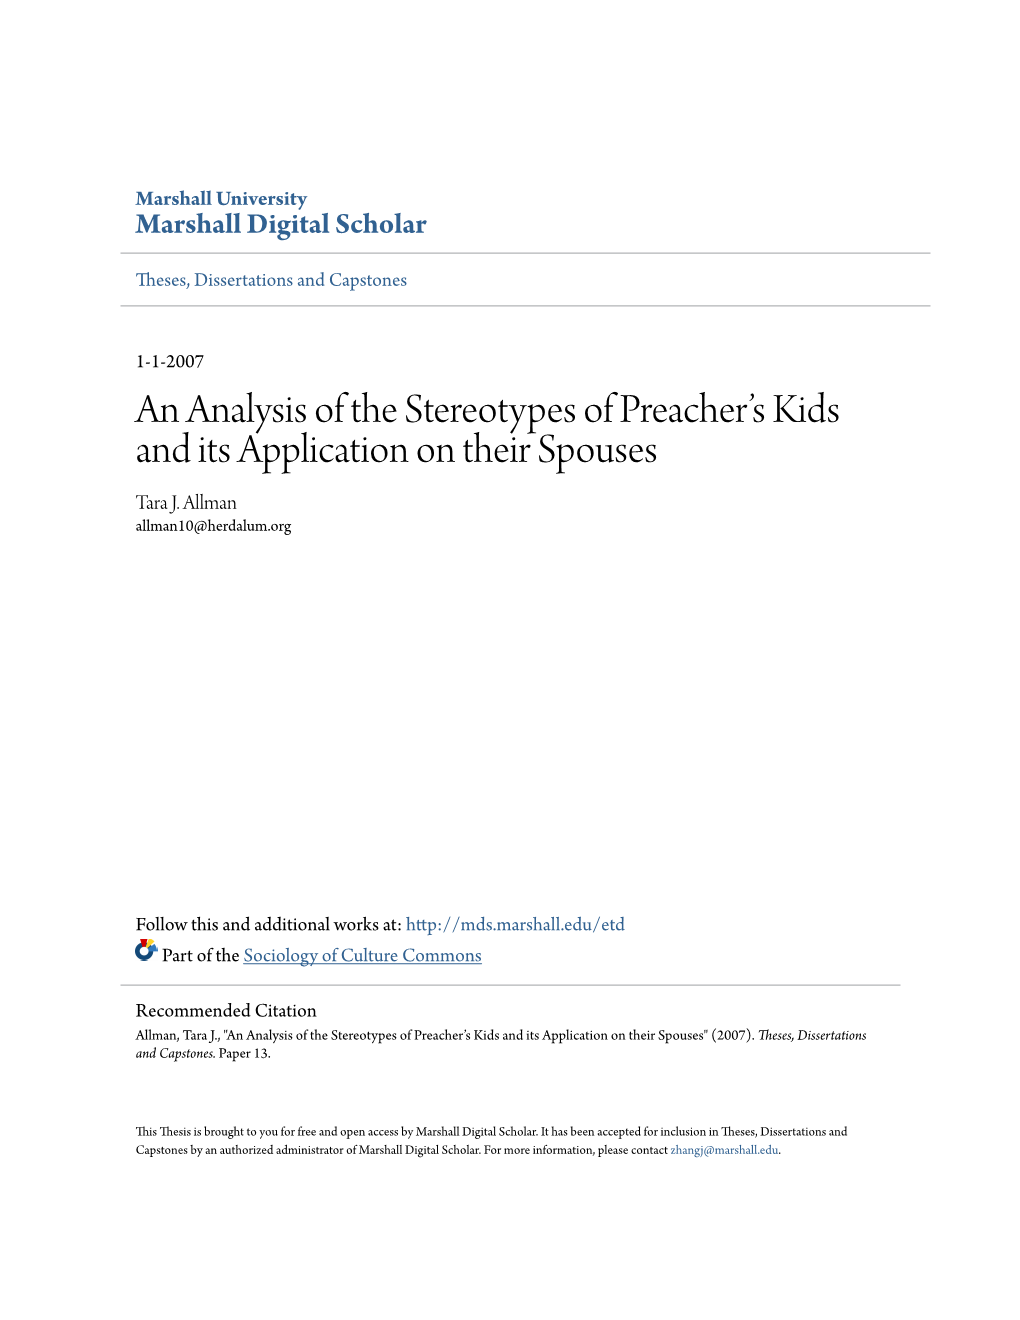 An Analysis of the Stereotypes of Preacher's Kids and Its Application